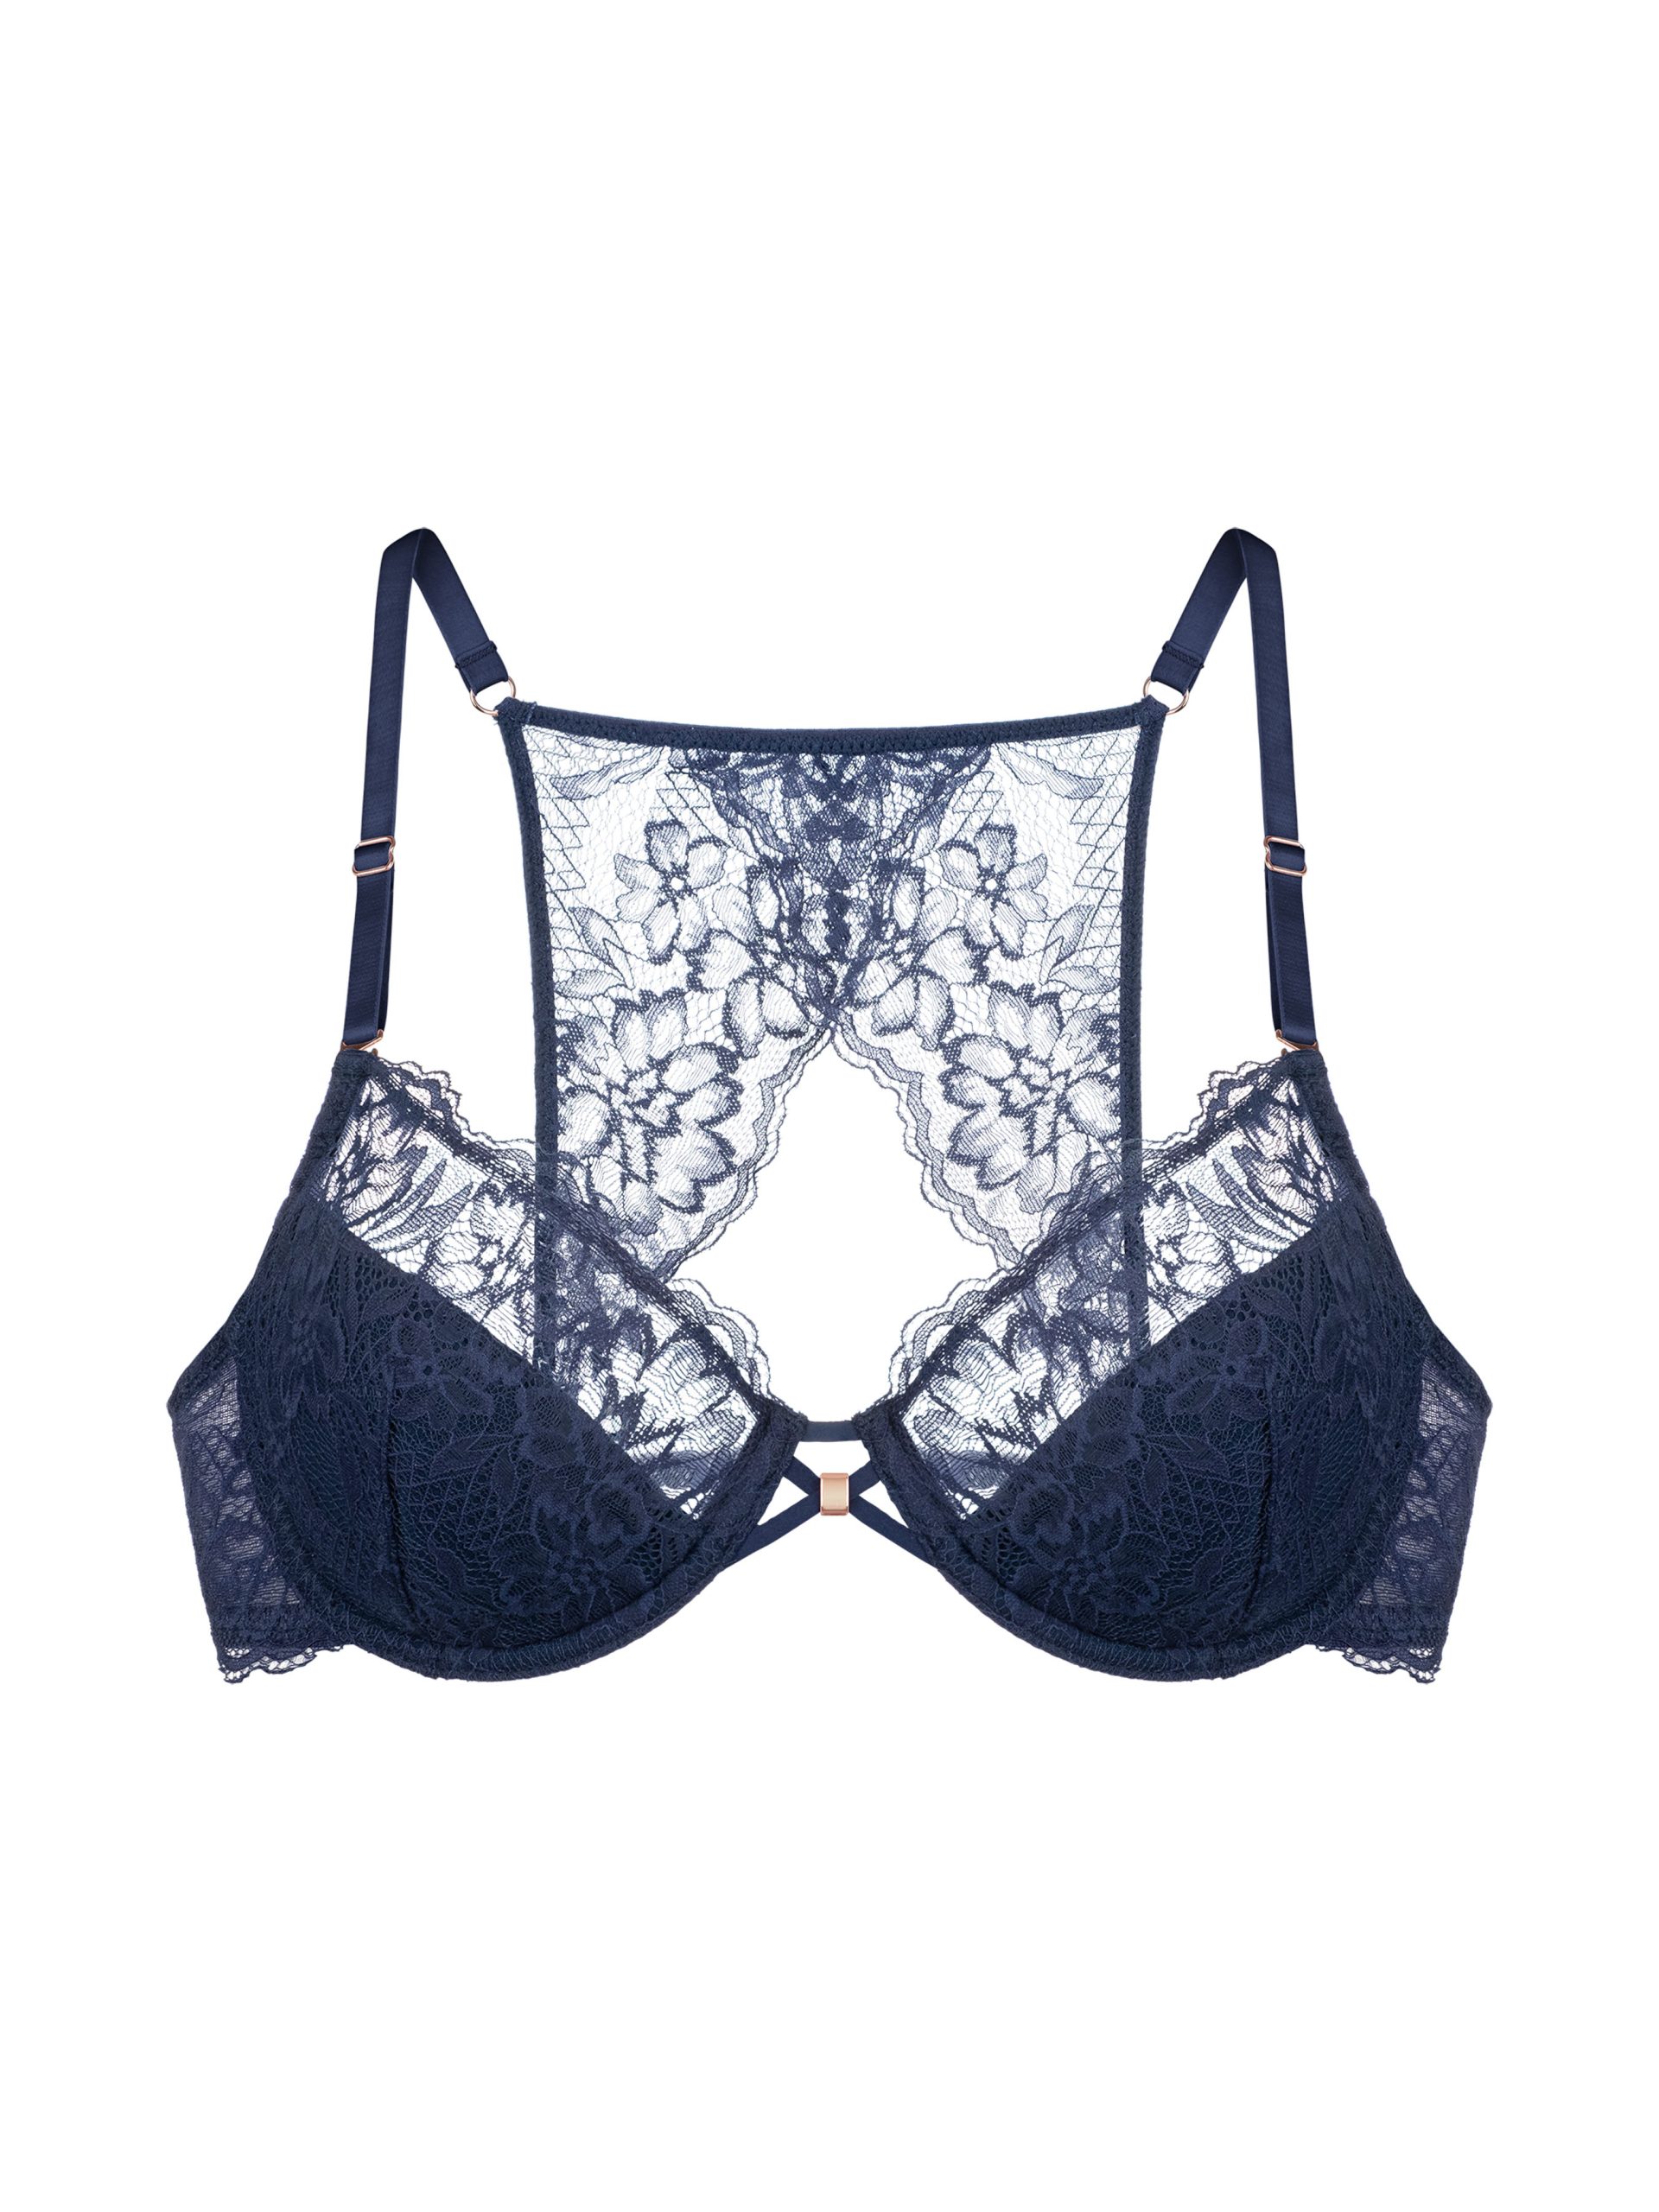 Edgars Club - Full Curves Ahead Penny C lingerie is designed for enhanced  support and fit, so you can show off your curves to the full. Penny C  2-pack Bras 299,95 Penny